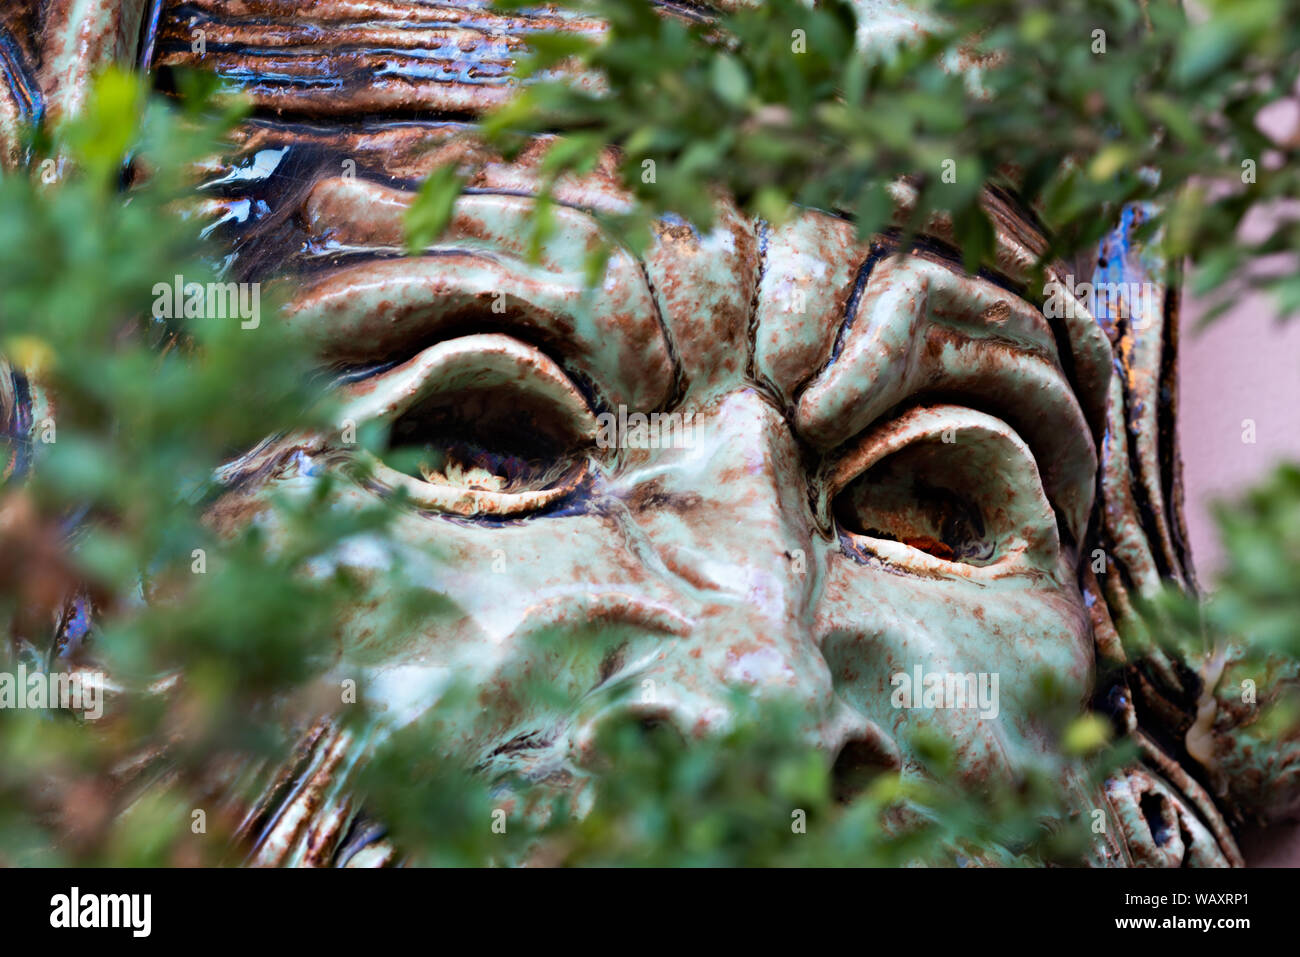 Ceramic face looking through the bushes in the garden Stock Photo